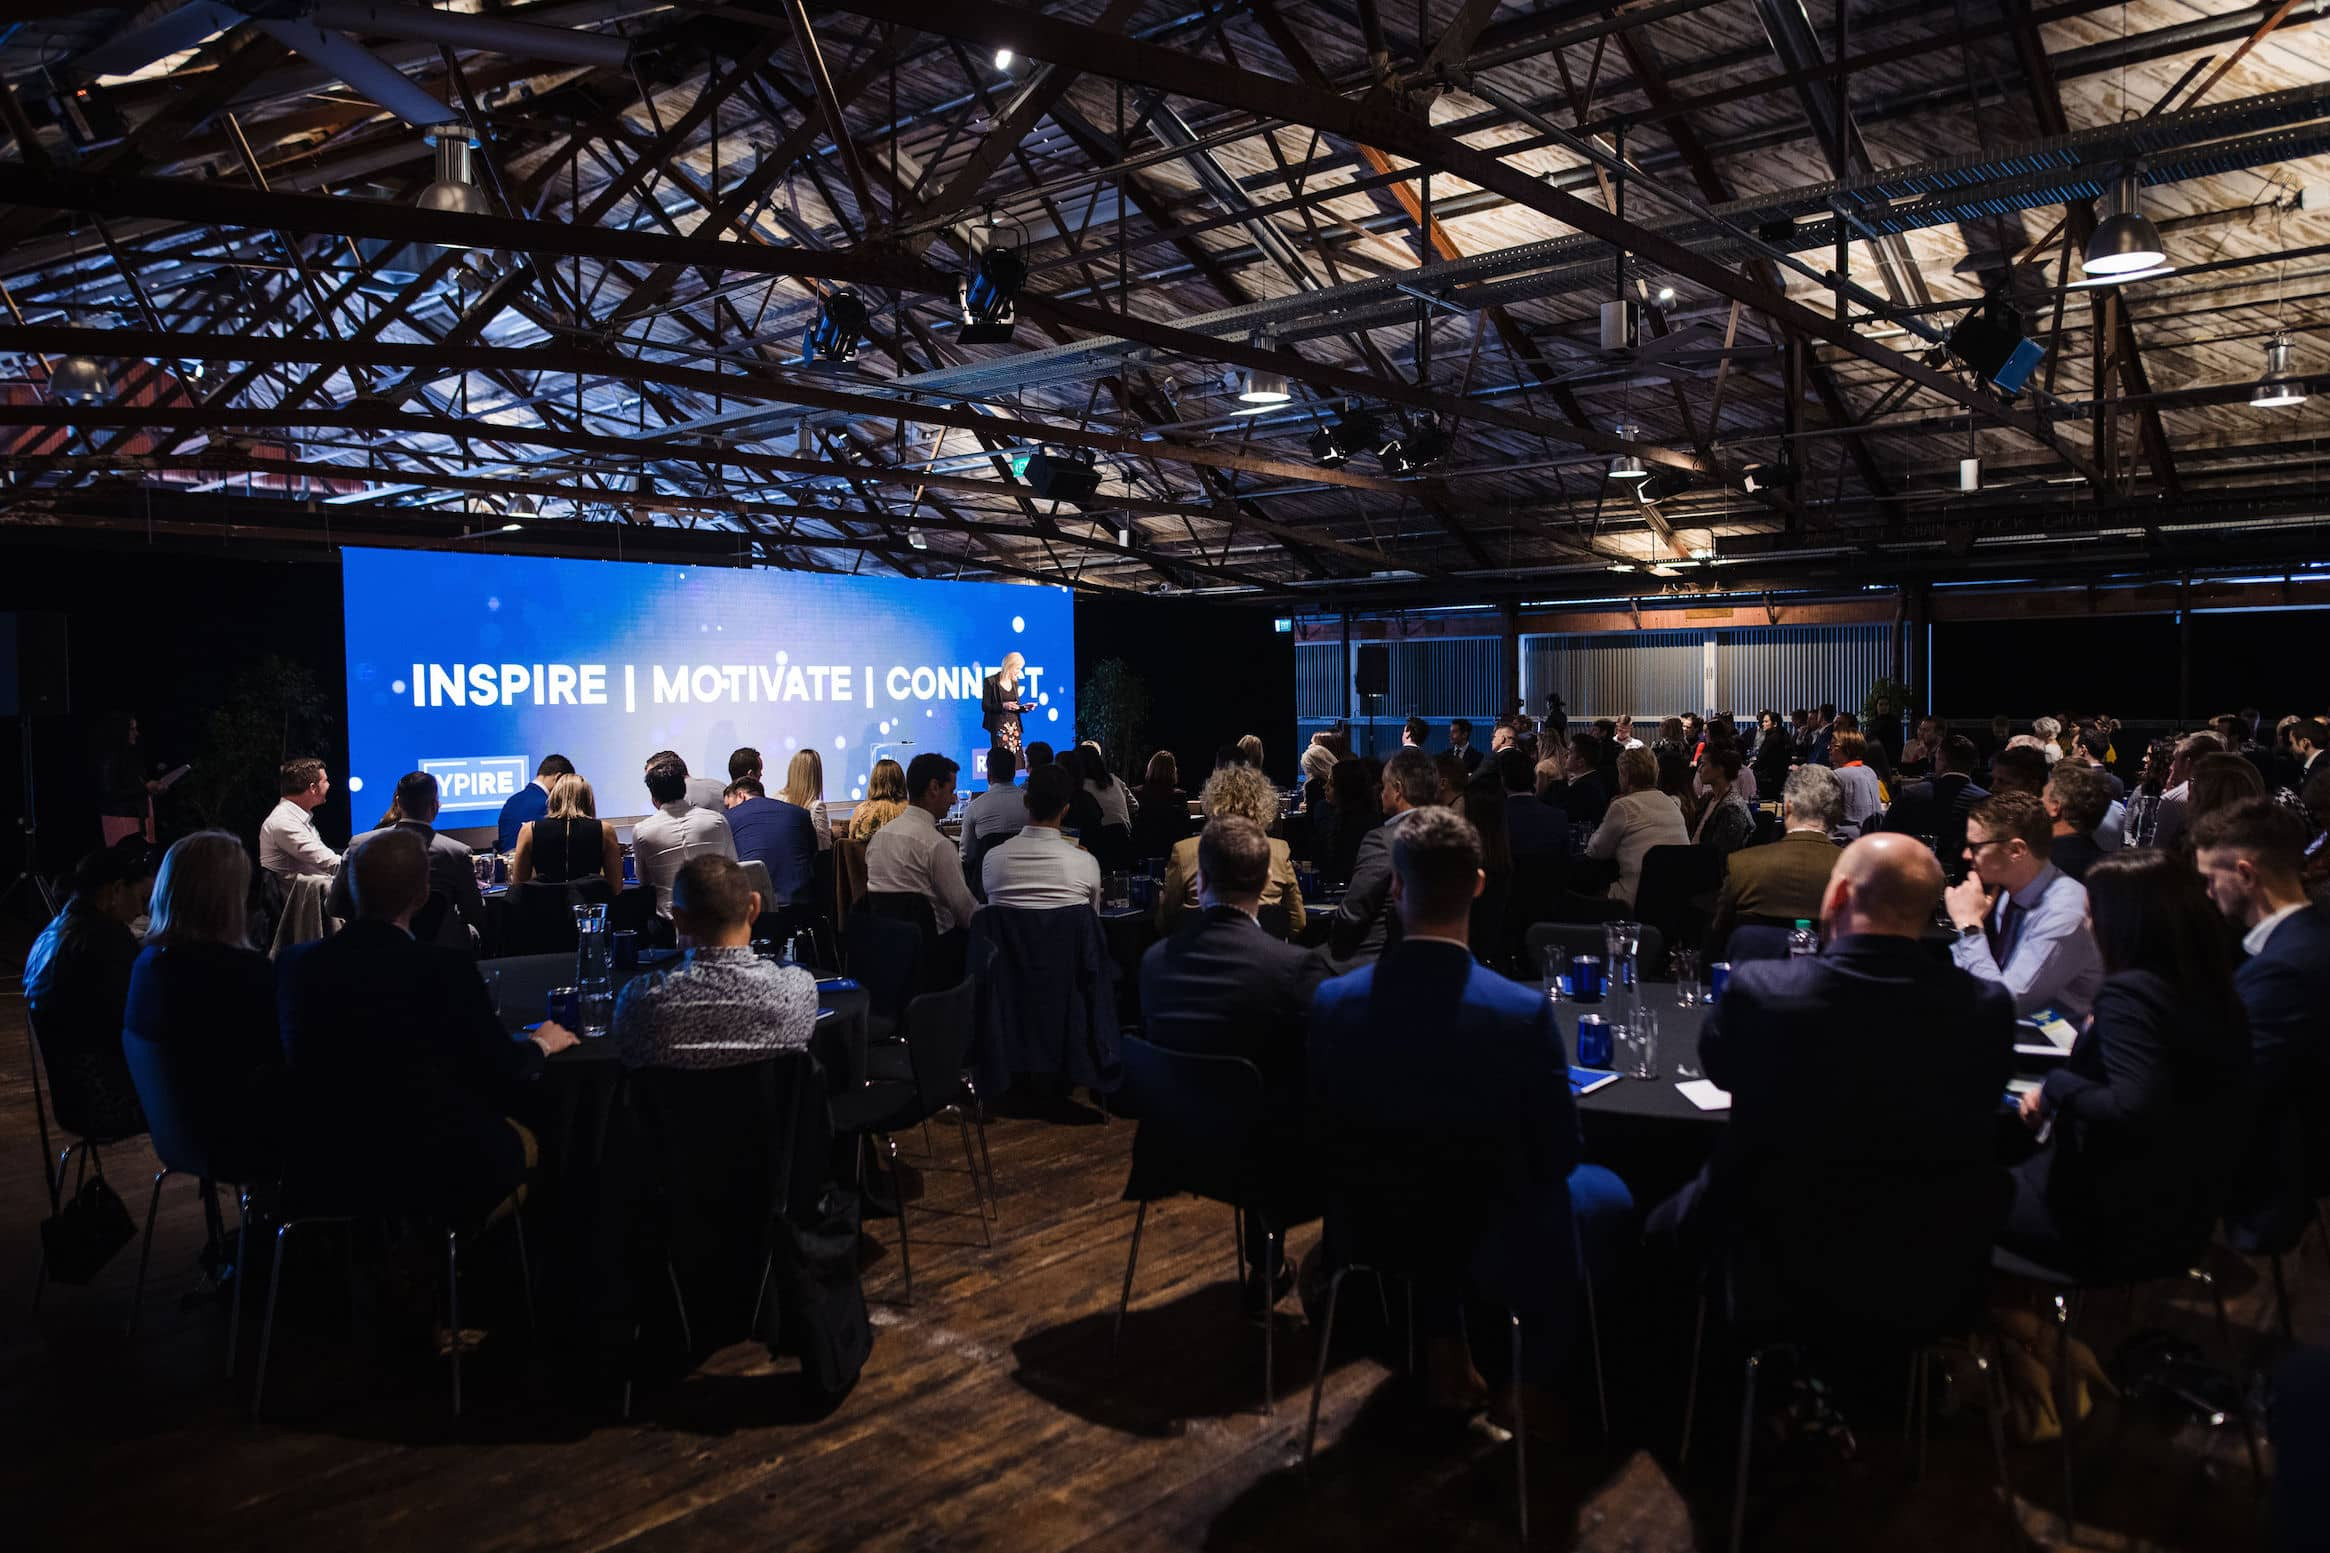 reinz ypire conference 2019, shed 10, auckland, awards